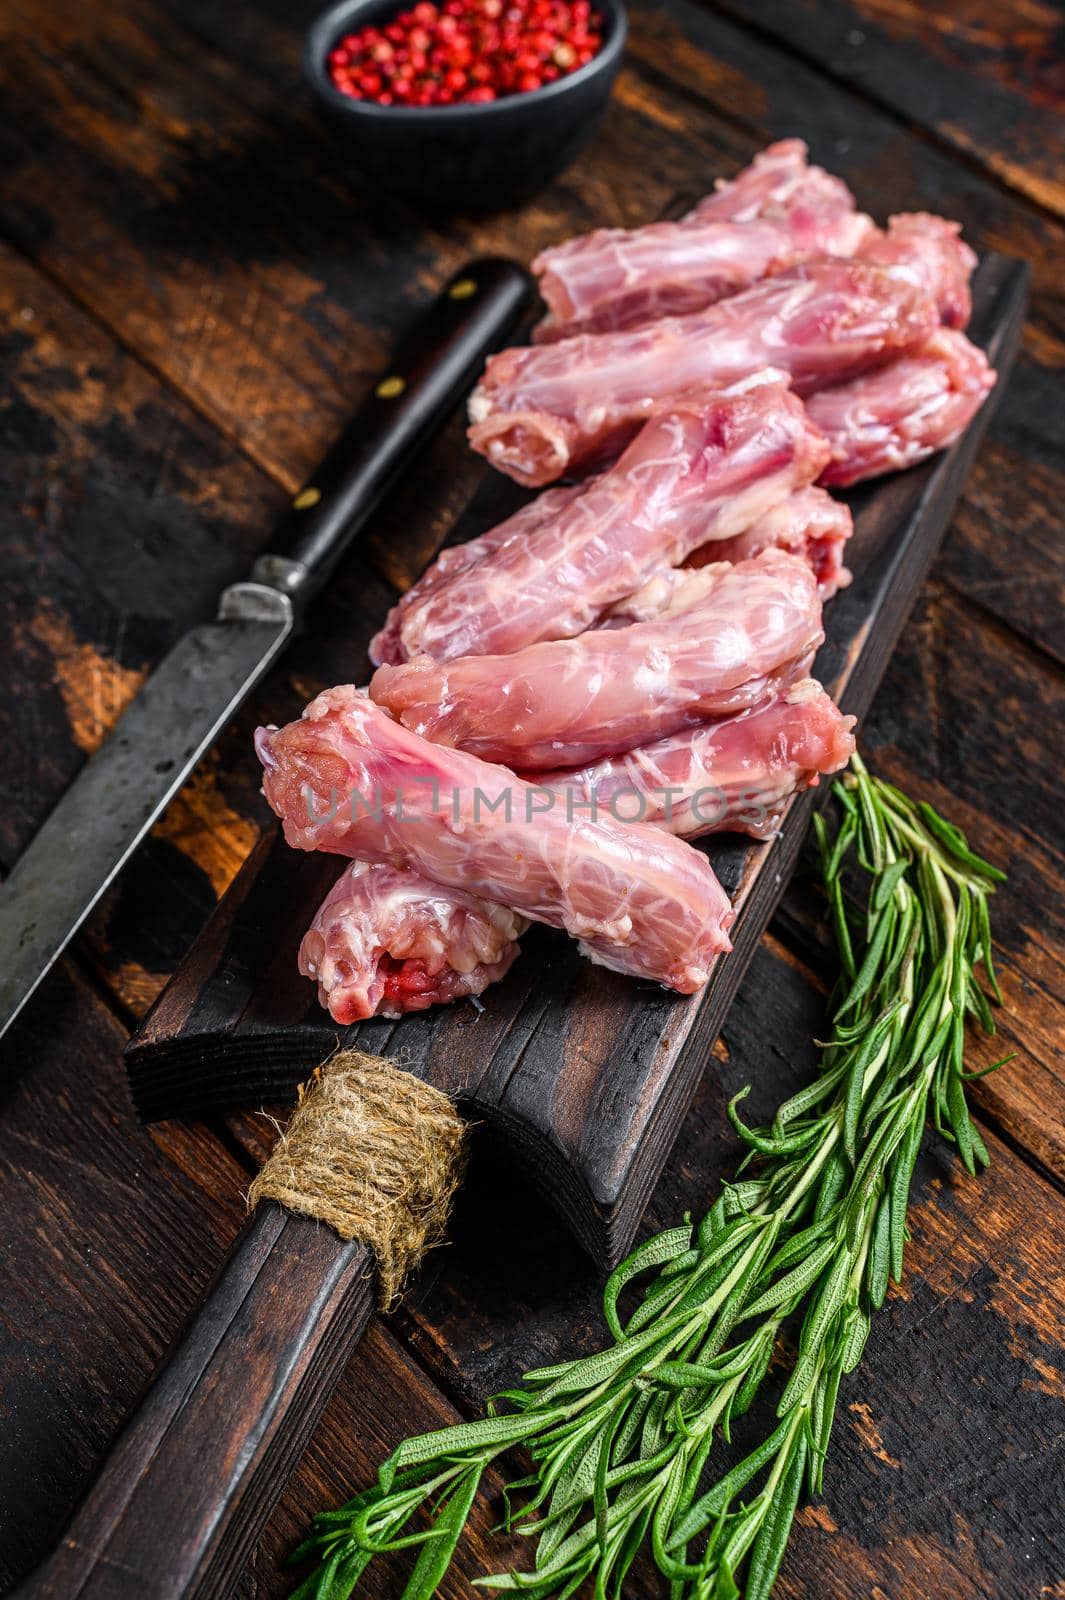 Chicken neck meat on a cutting board. Wooden background. Top view.